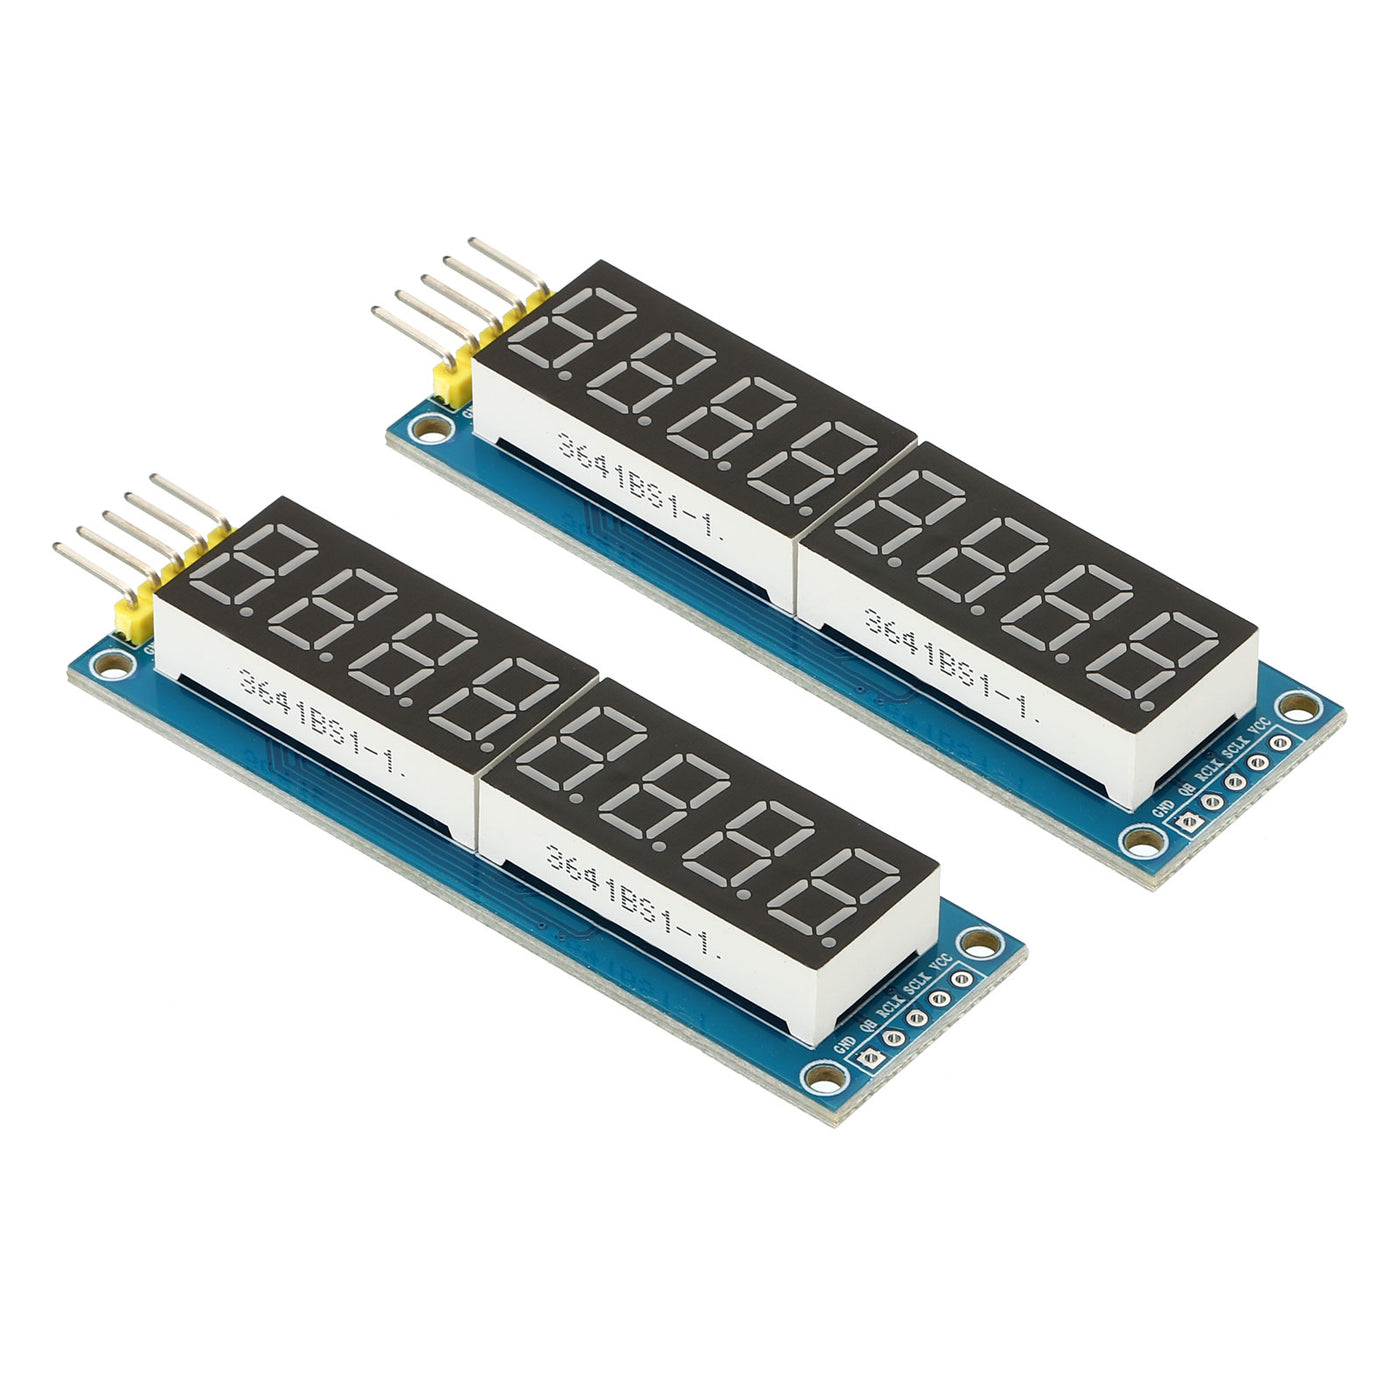 Harfington 0.36" 8 Digit LED Display Module, 2 Pcs 3.5-5V 7 Segment Common Anode LED Display Digital Tube for Electronic Driver Board 2.8 x 0.9 x 0.4 Inch, Red